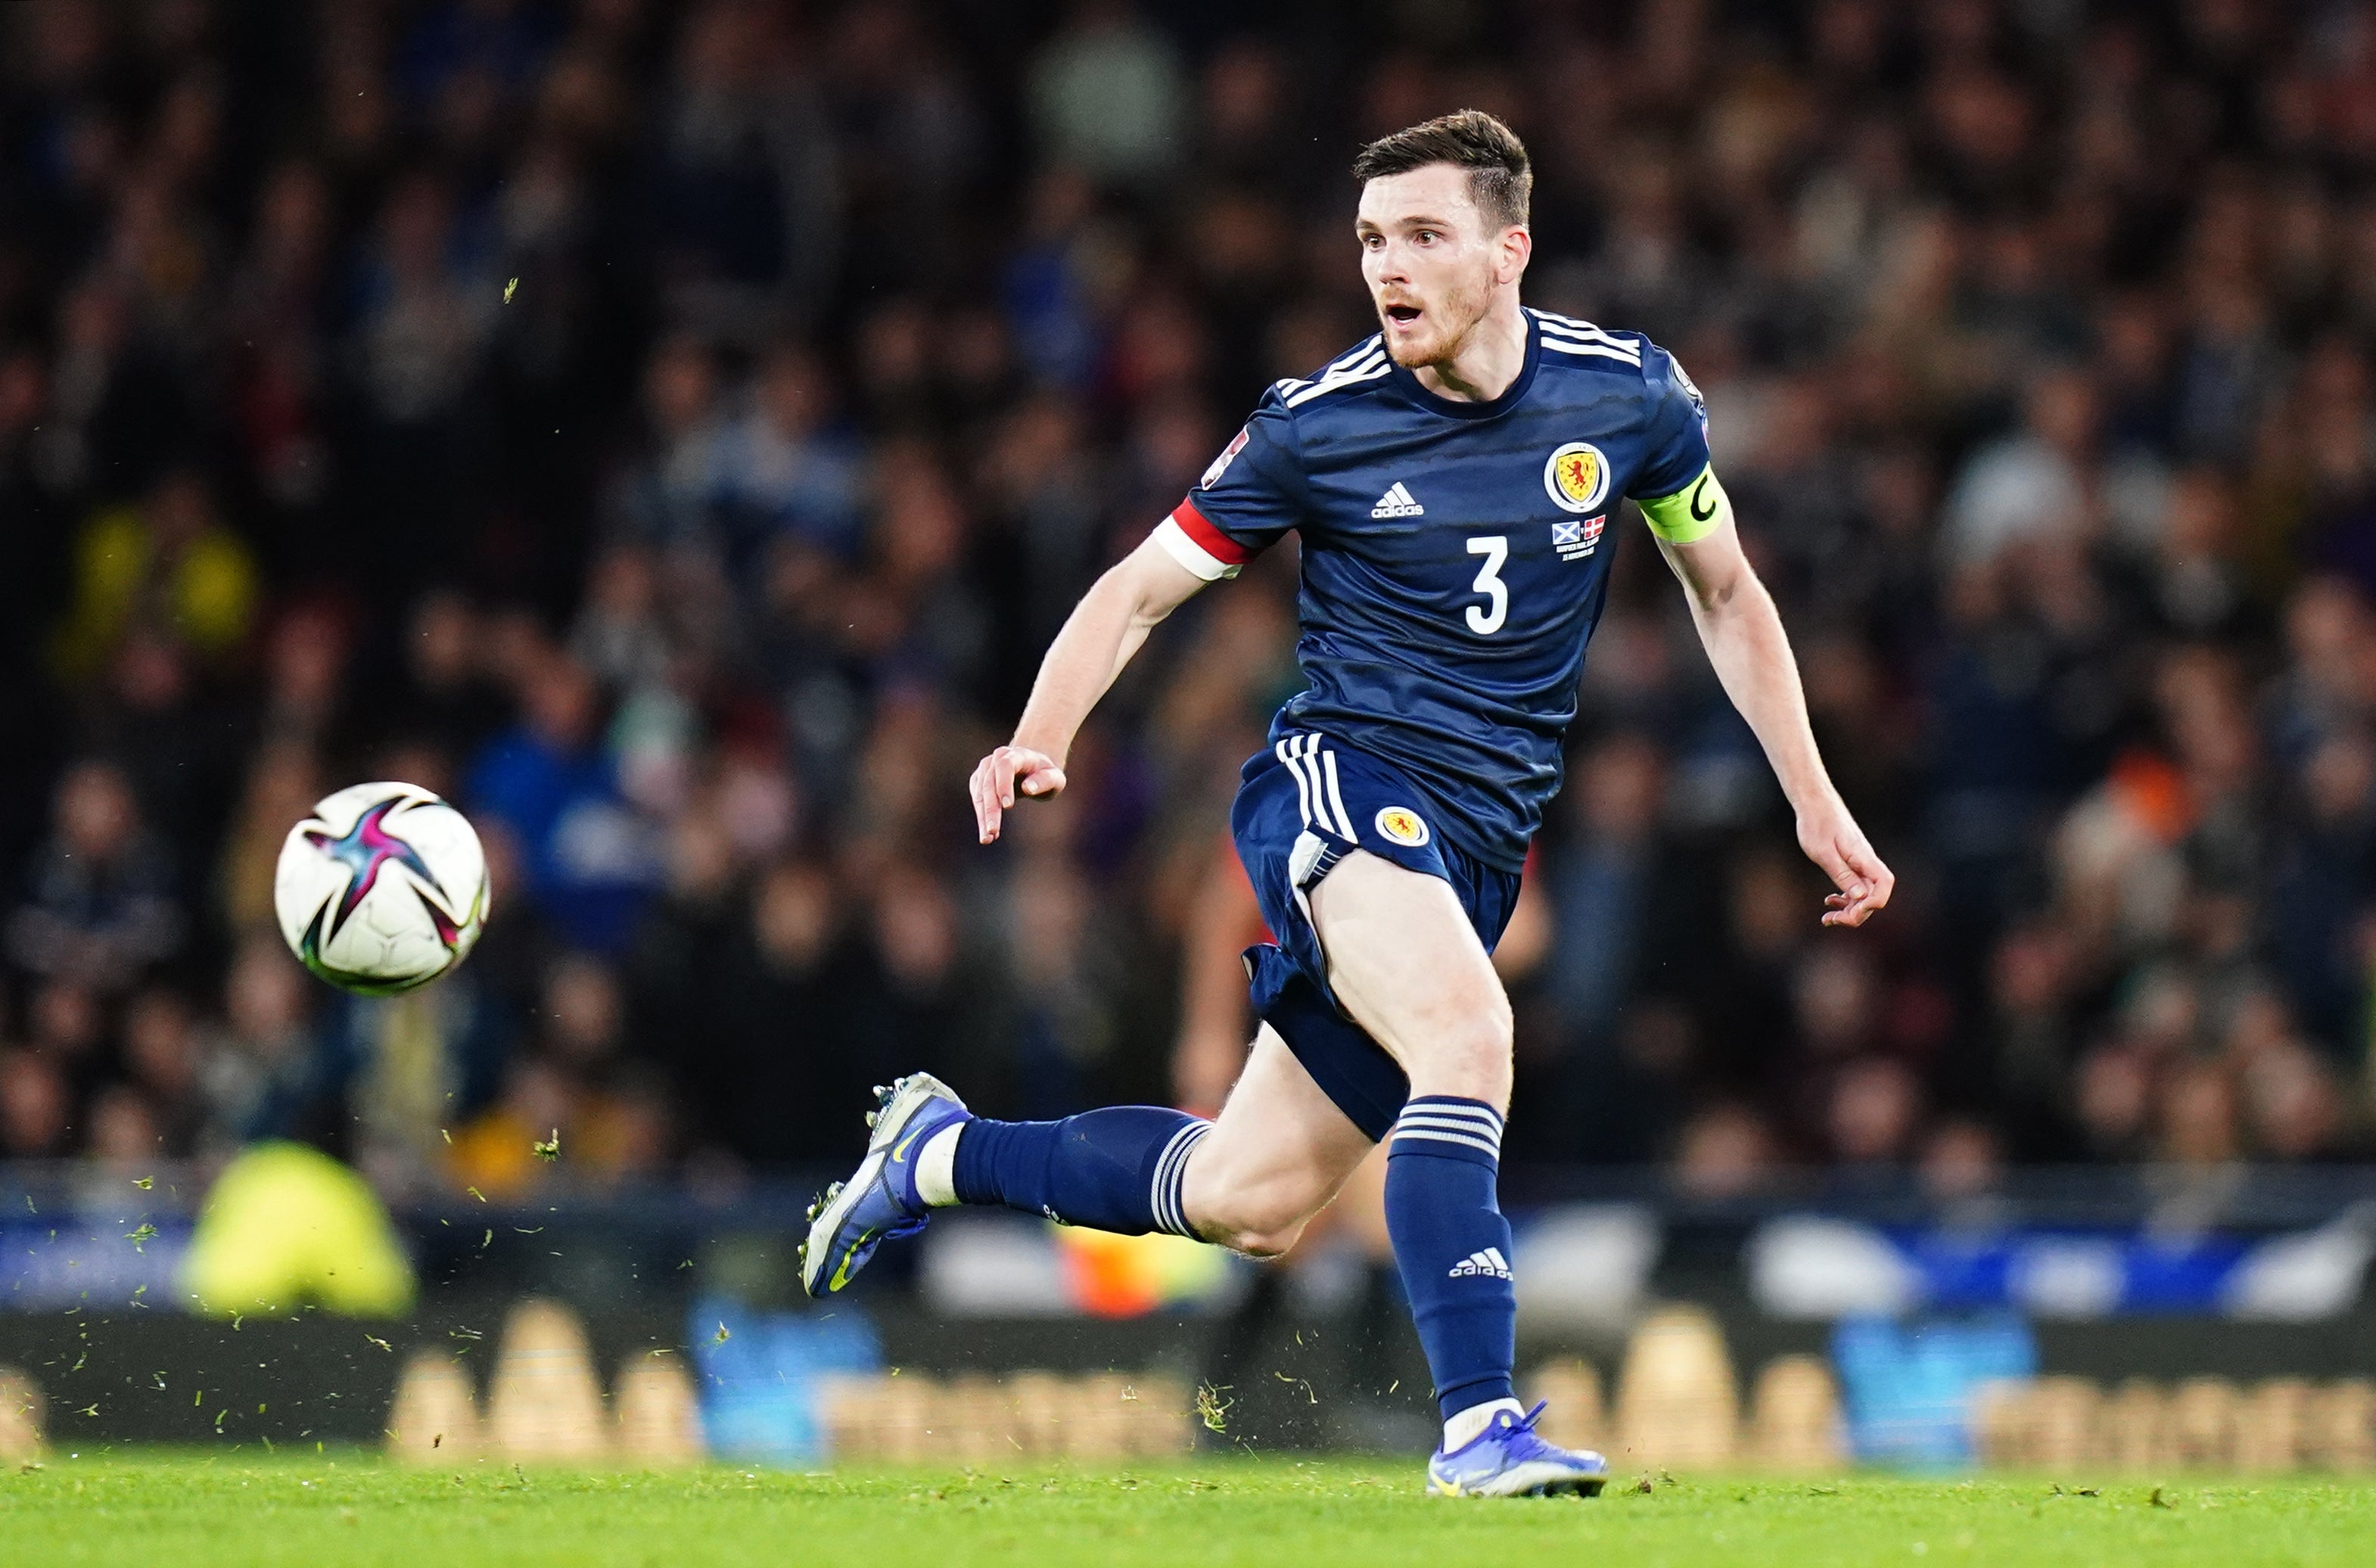 Scotland will be hoping Andy Robertson leads the men’s football team to victory against Ukraine (Jane Barlow/PA)